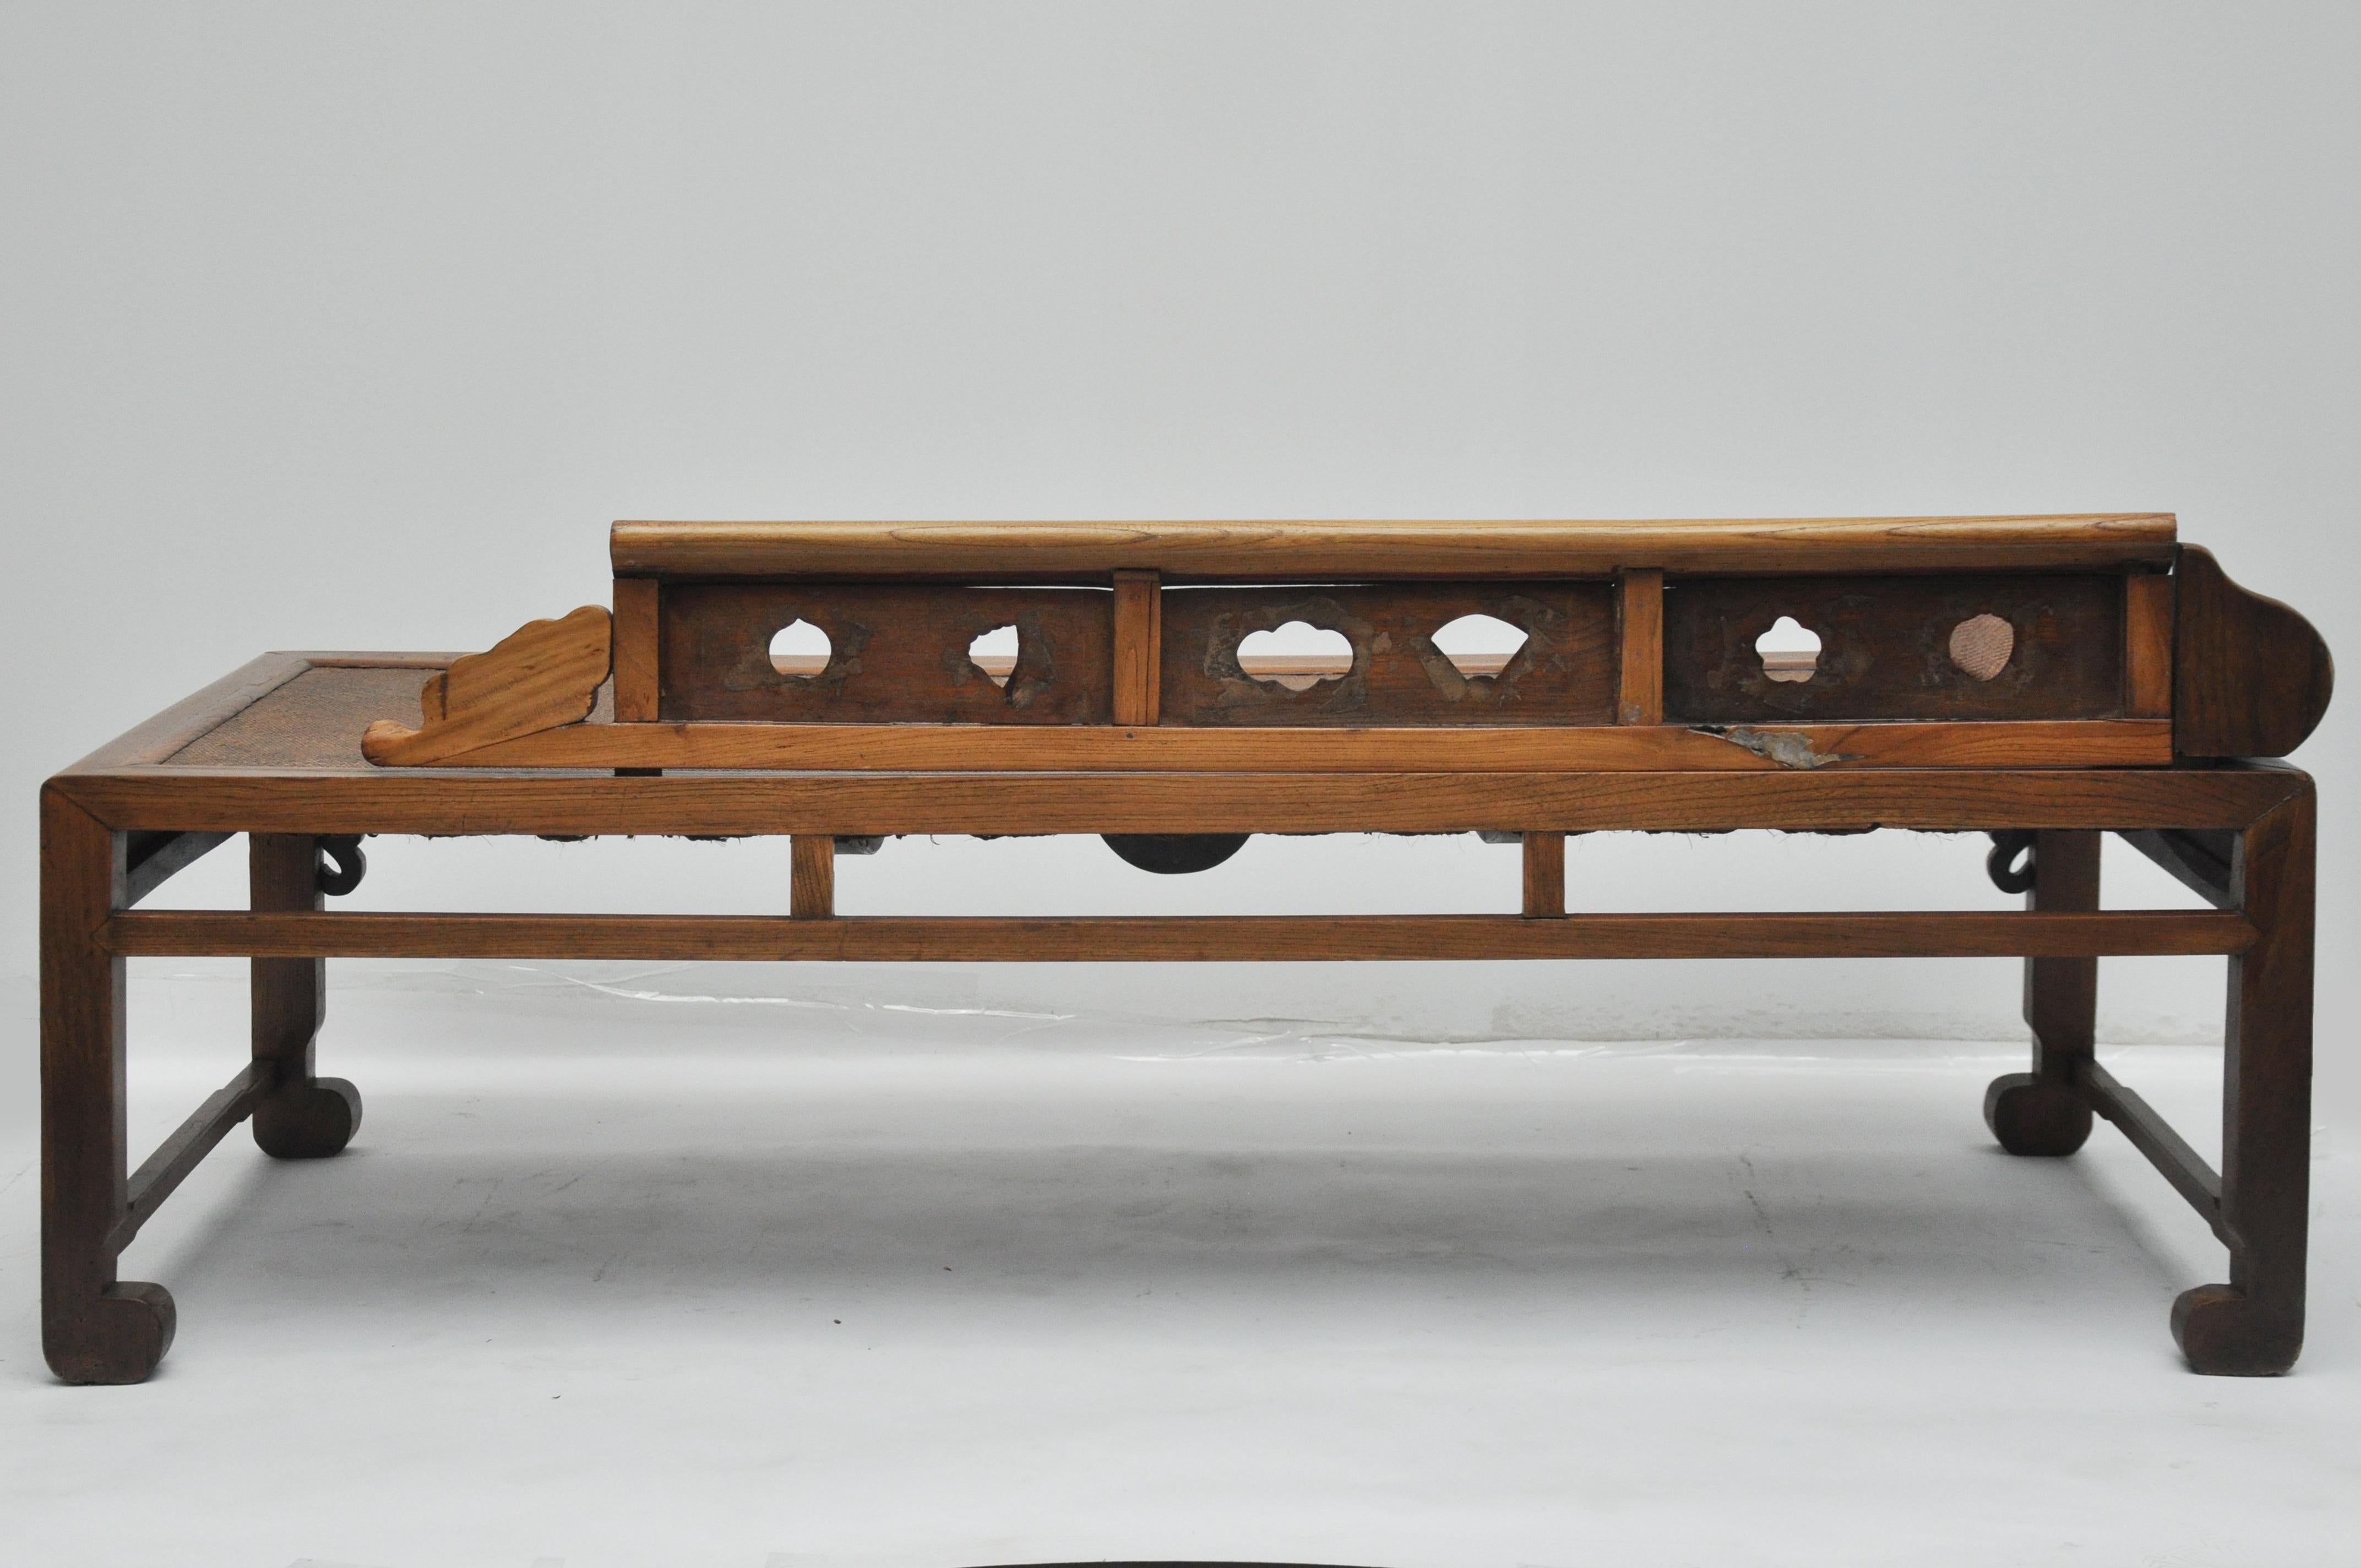 20th Century Asian Carved Wooden and Woven Daybed